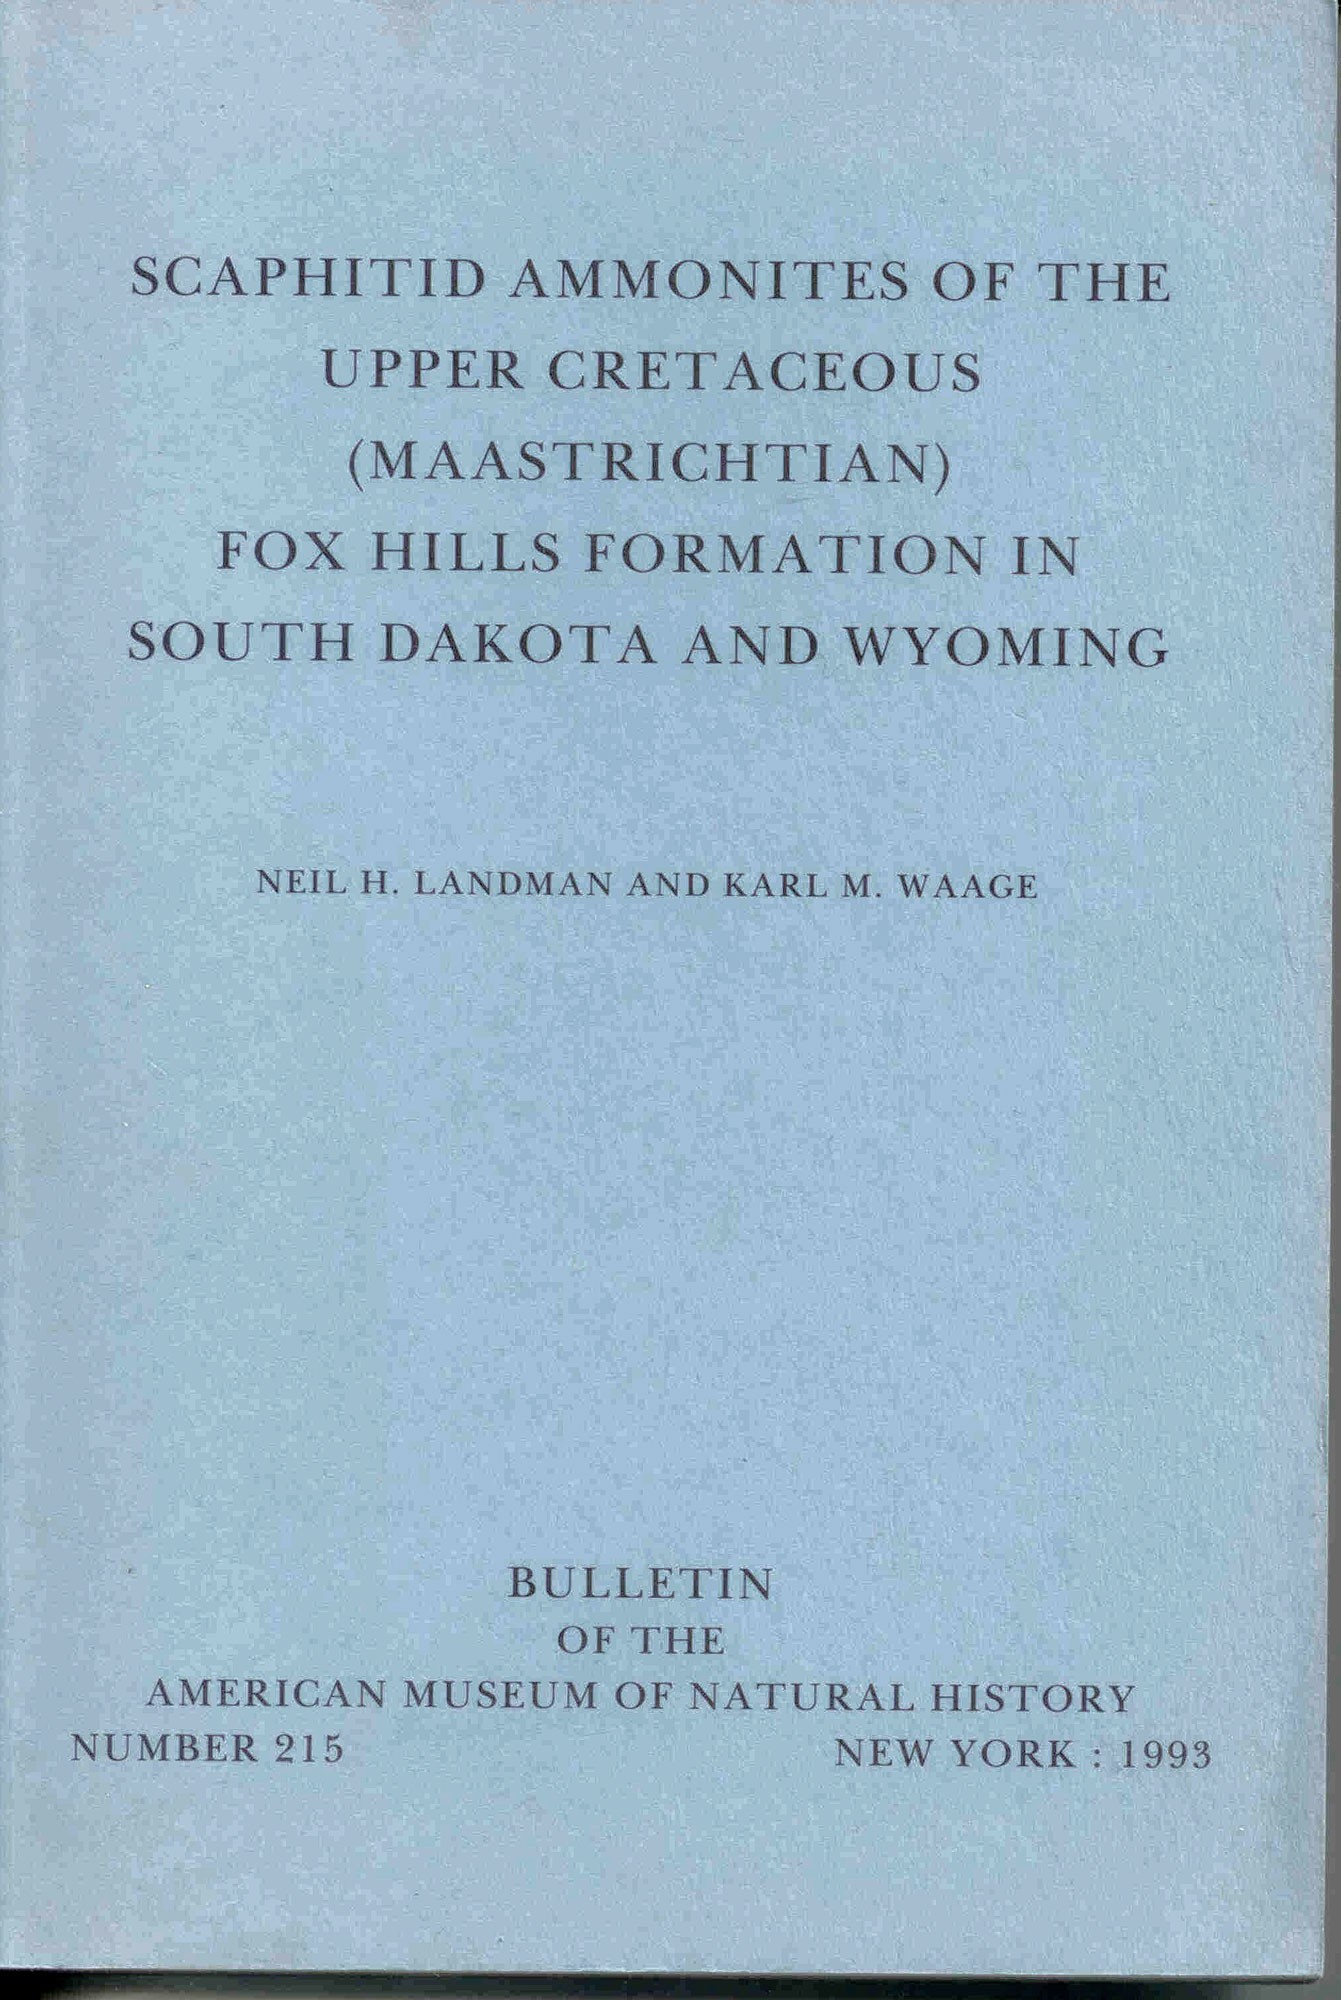 LANDMAN, N.H. ,WAAGE, K.M.: Scaphitid ammonites of the Upper Cretaceous (Maastrichtian) Fox Hills Formation in South Dakota and Wyoming.